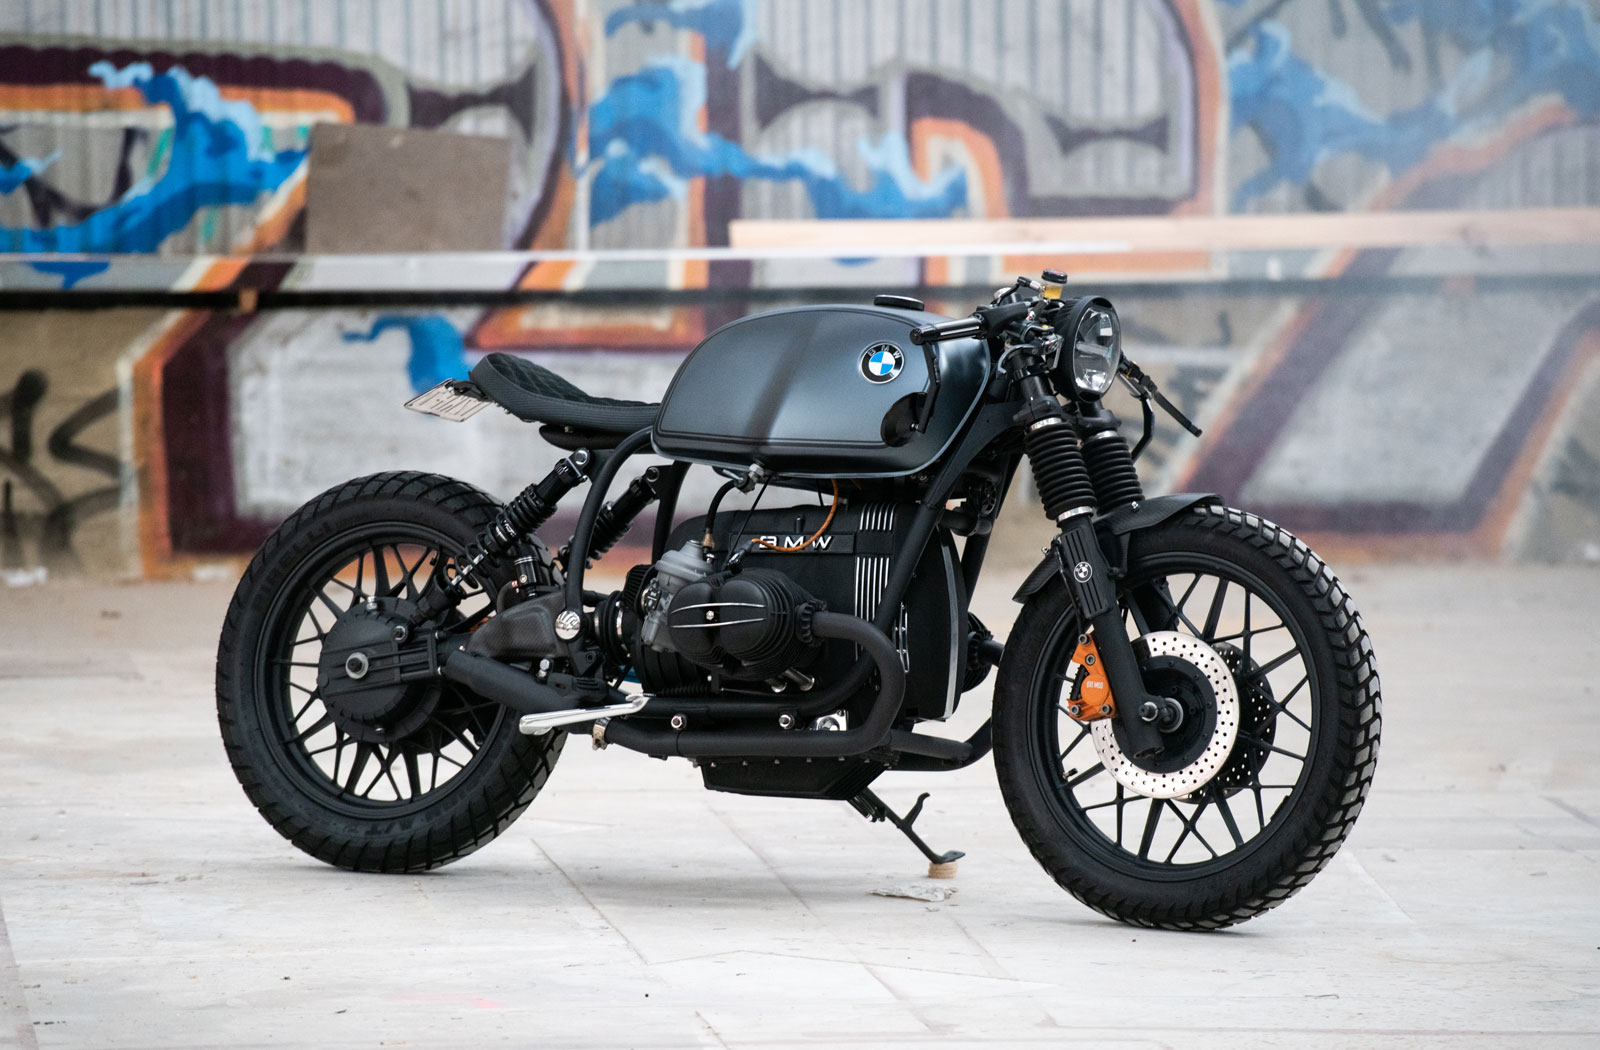 Twisted Fate BMW R100RT